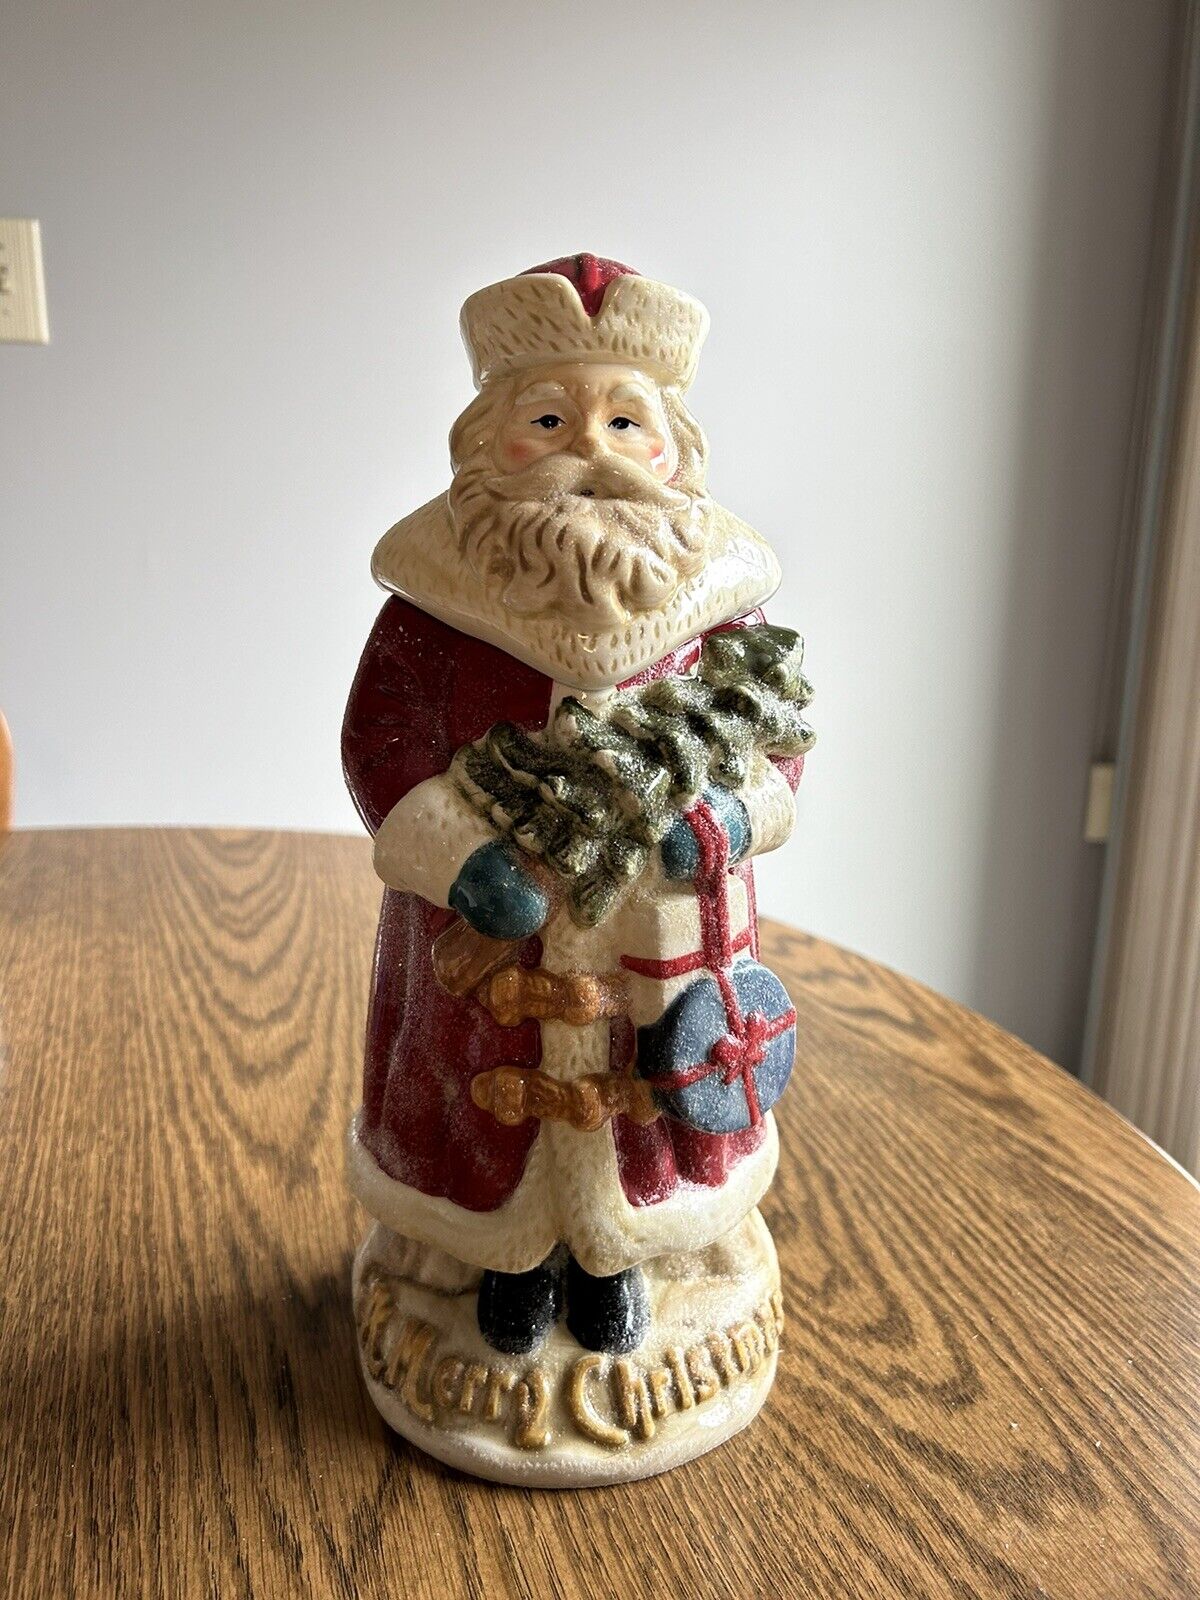 At Home America Vintage Ceramic Santa Claus Treat Canister